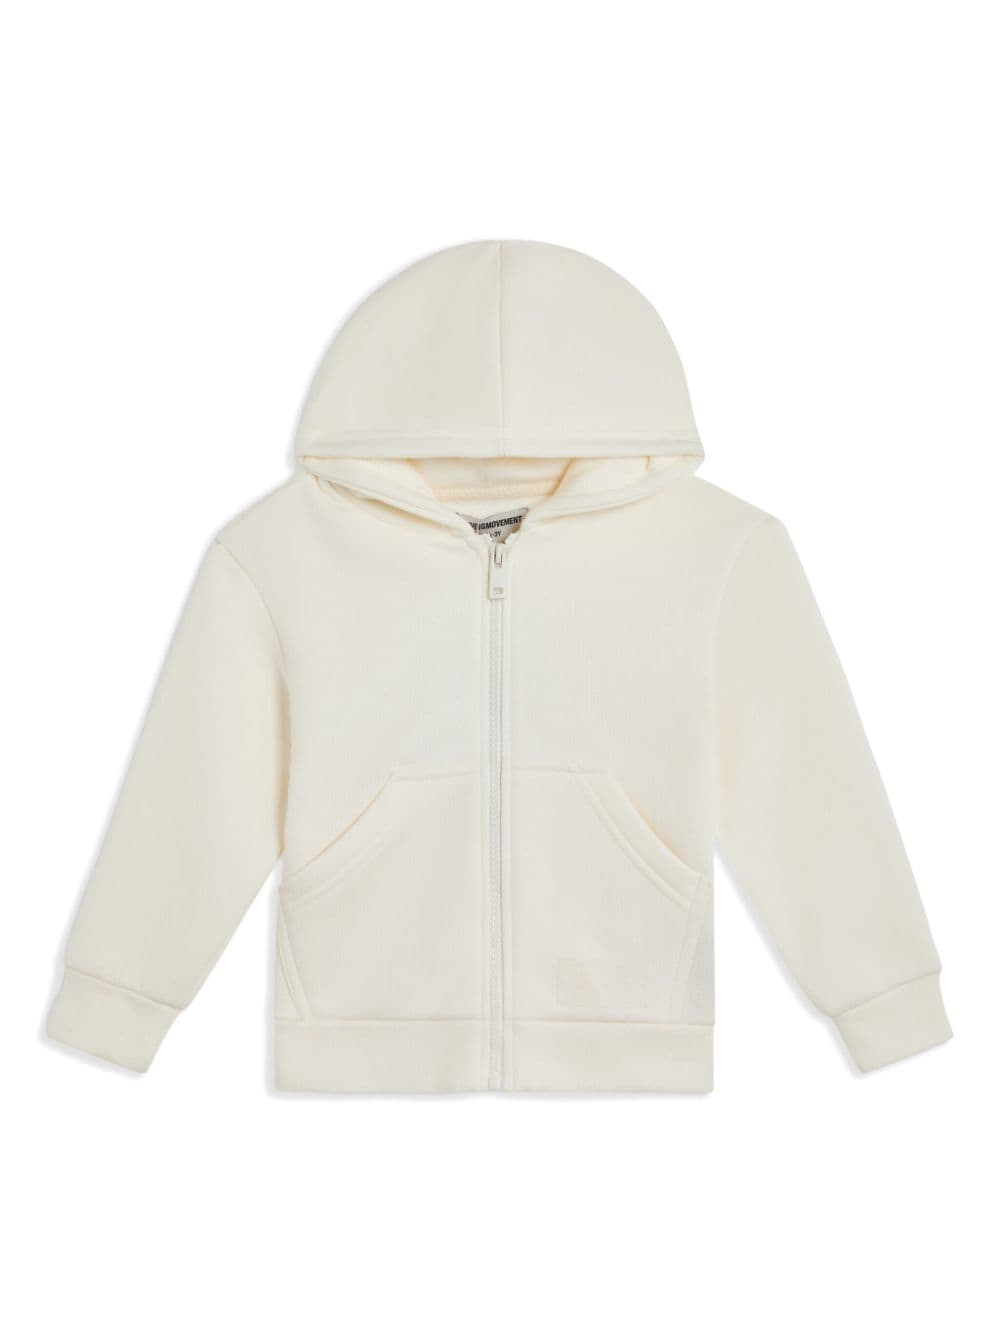 THE GIVING MOVEMENT logo-appliqué zip-up hoodie - White